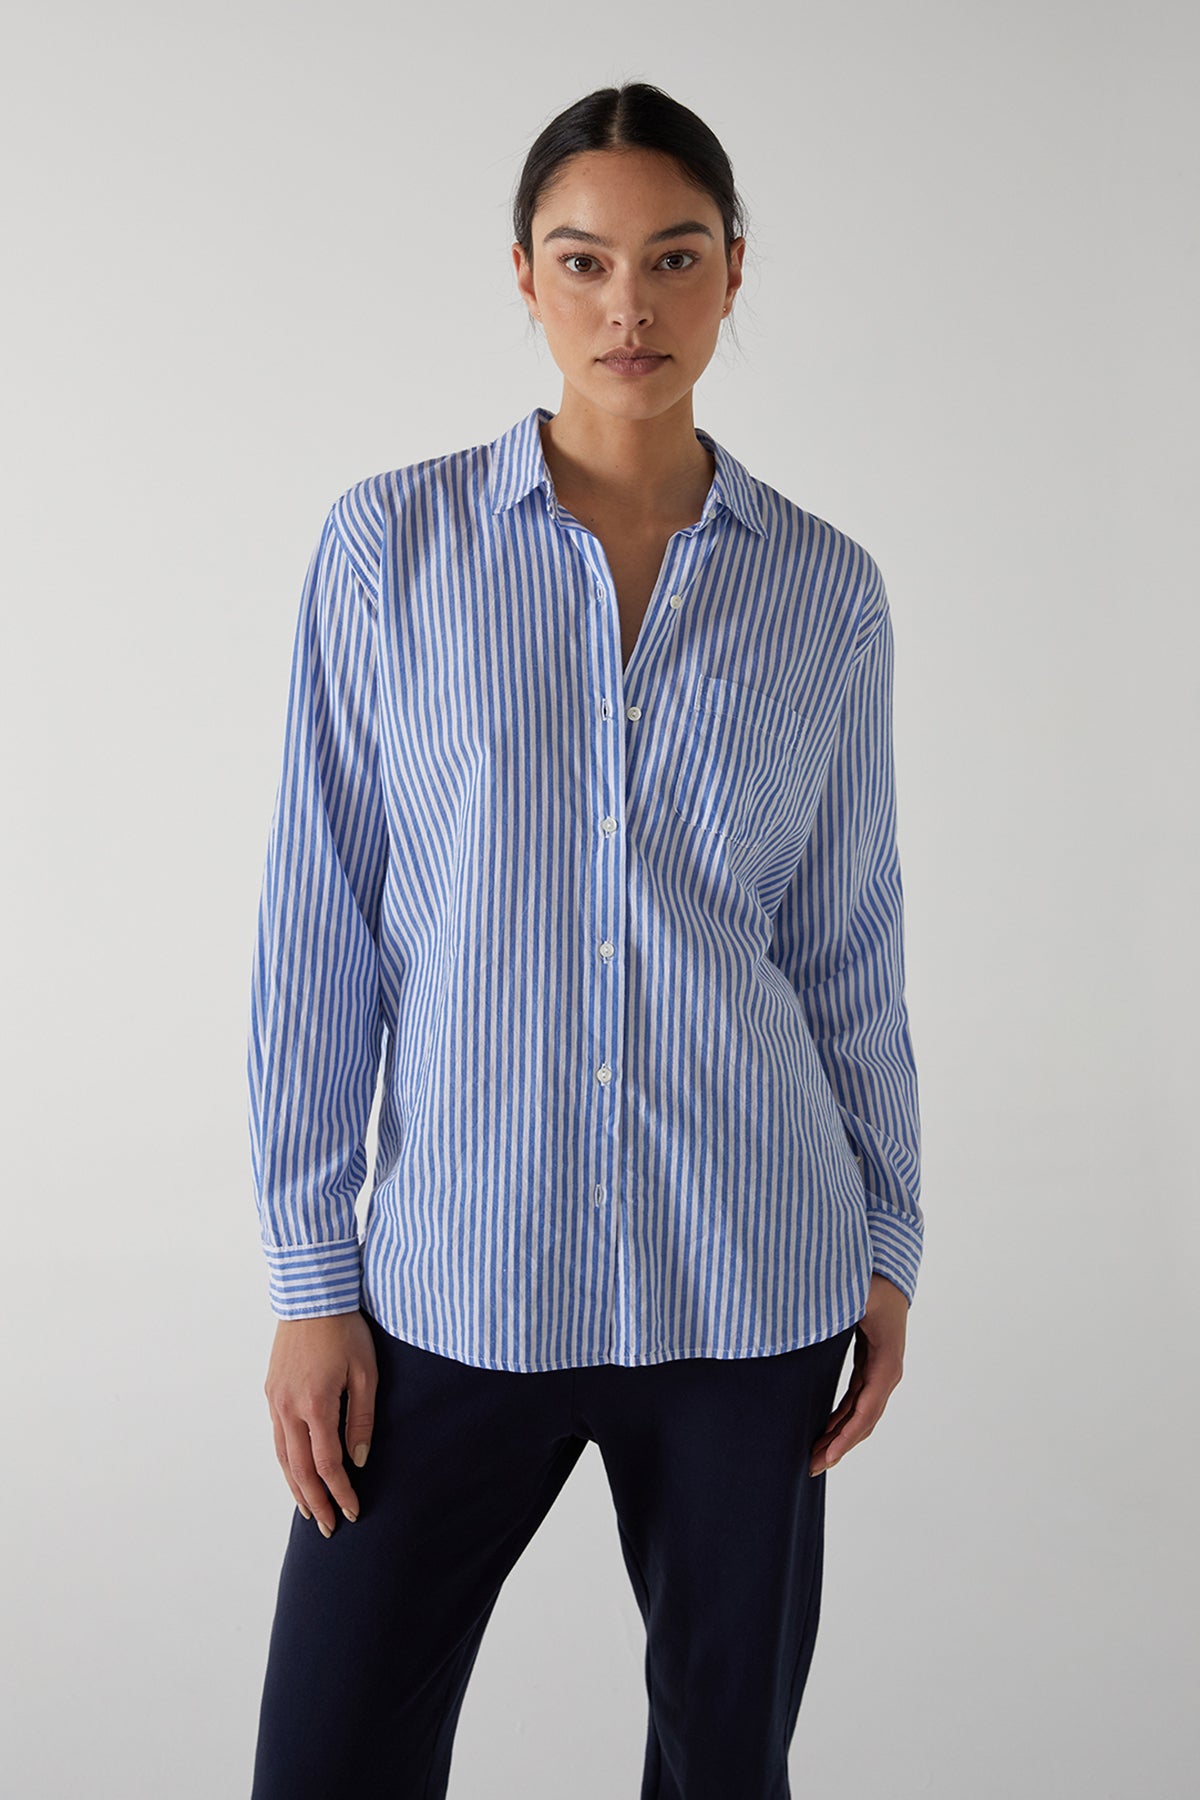 Newport Blue and White Stripe Button Down Cotton Shirt Front-25154865234113